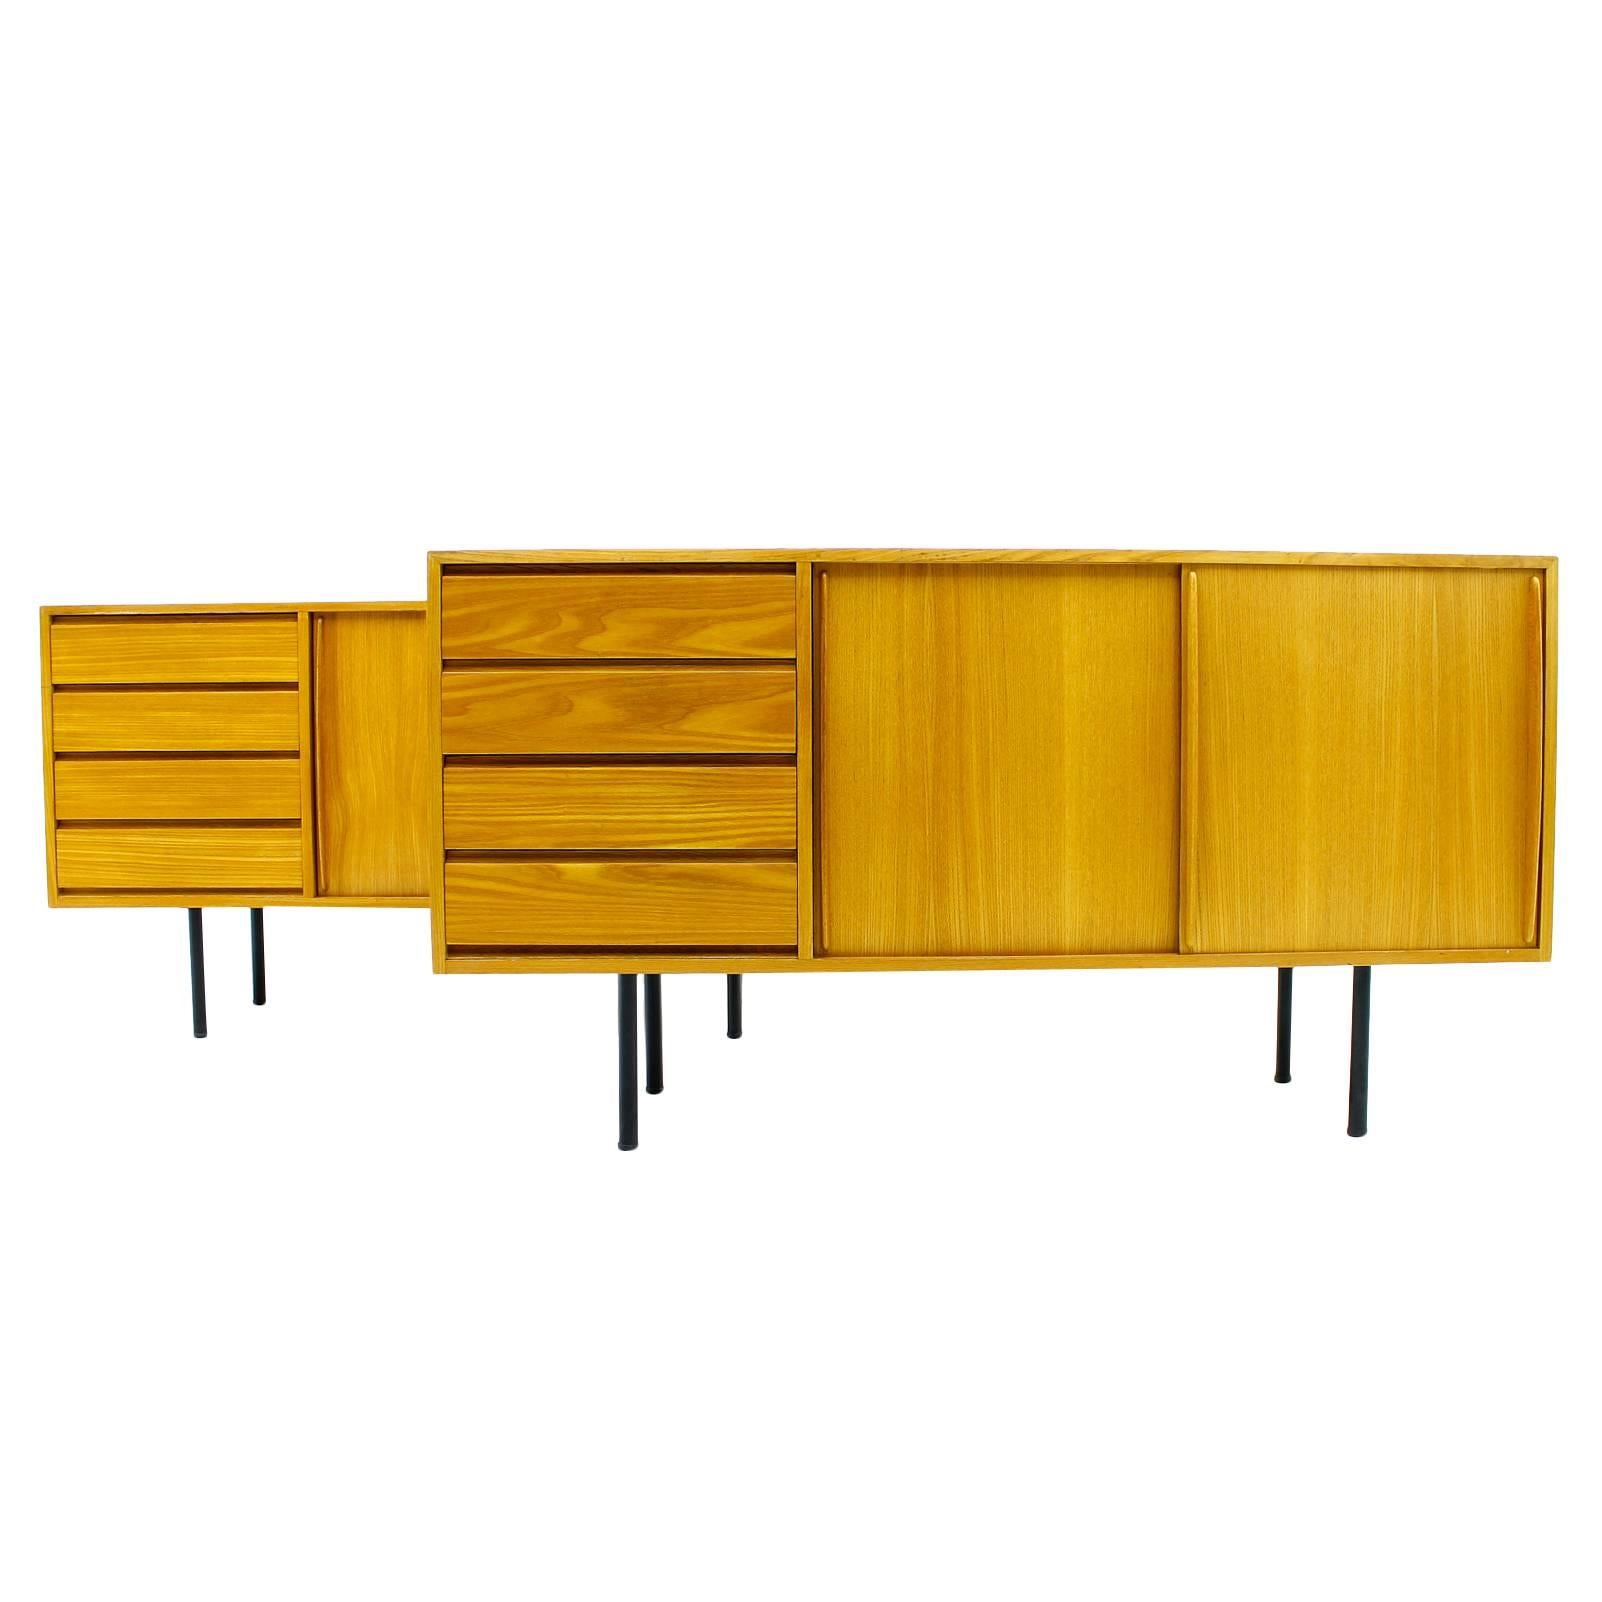 Rare Pair of Ashwood Sideboard by Ollie Borg, Asko Finland, 1950s